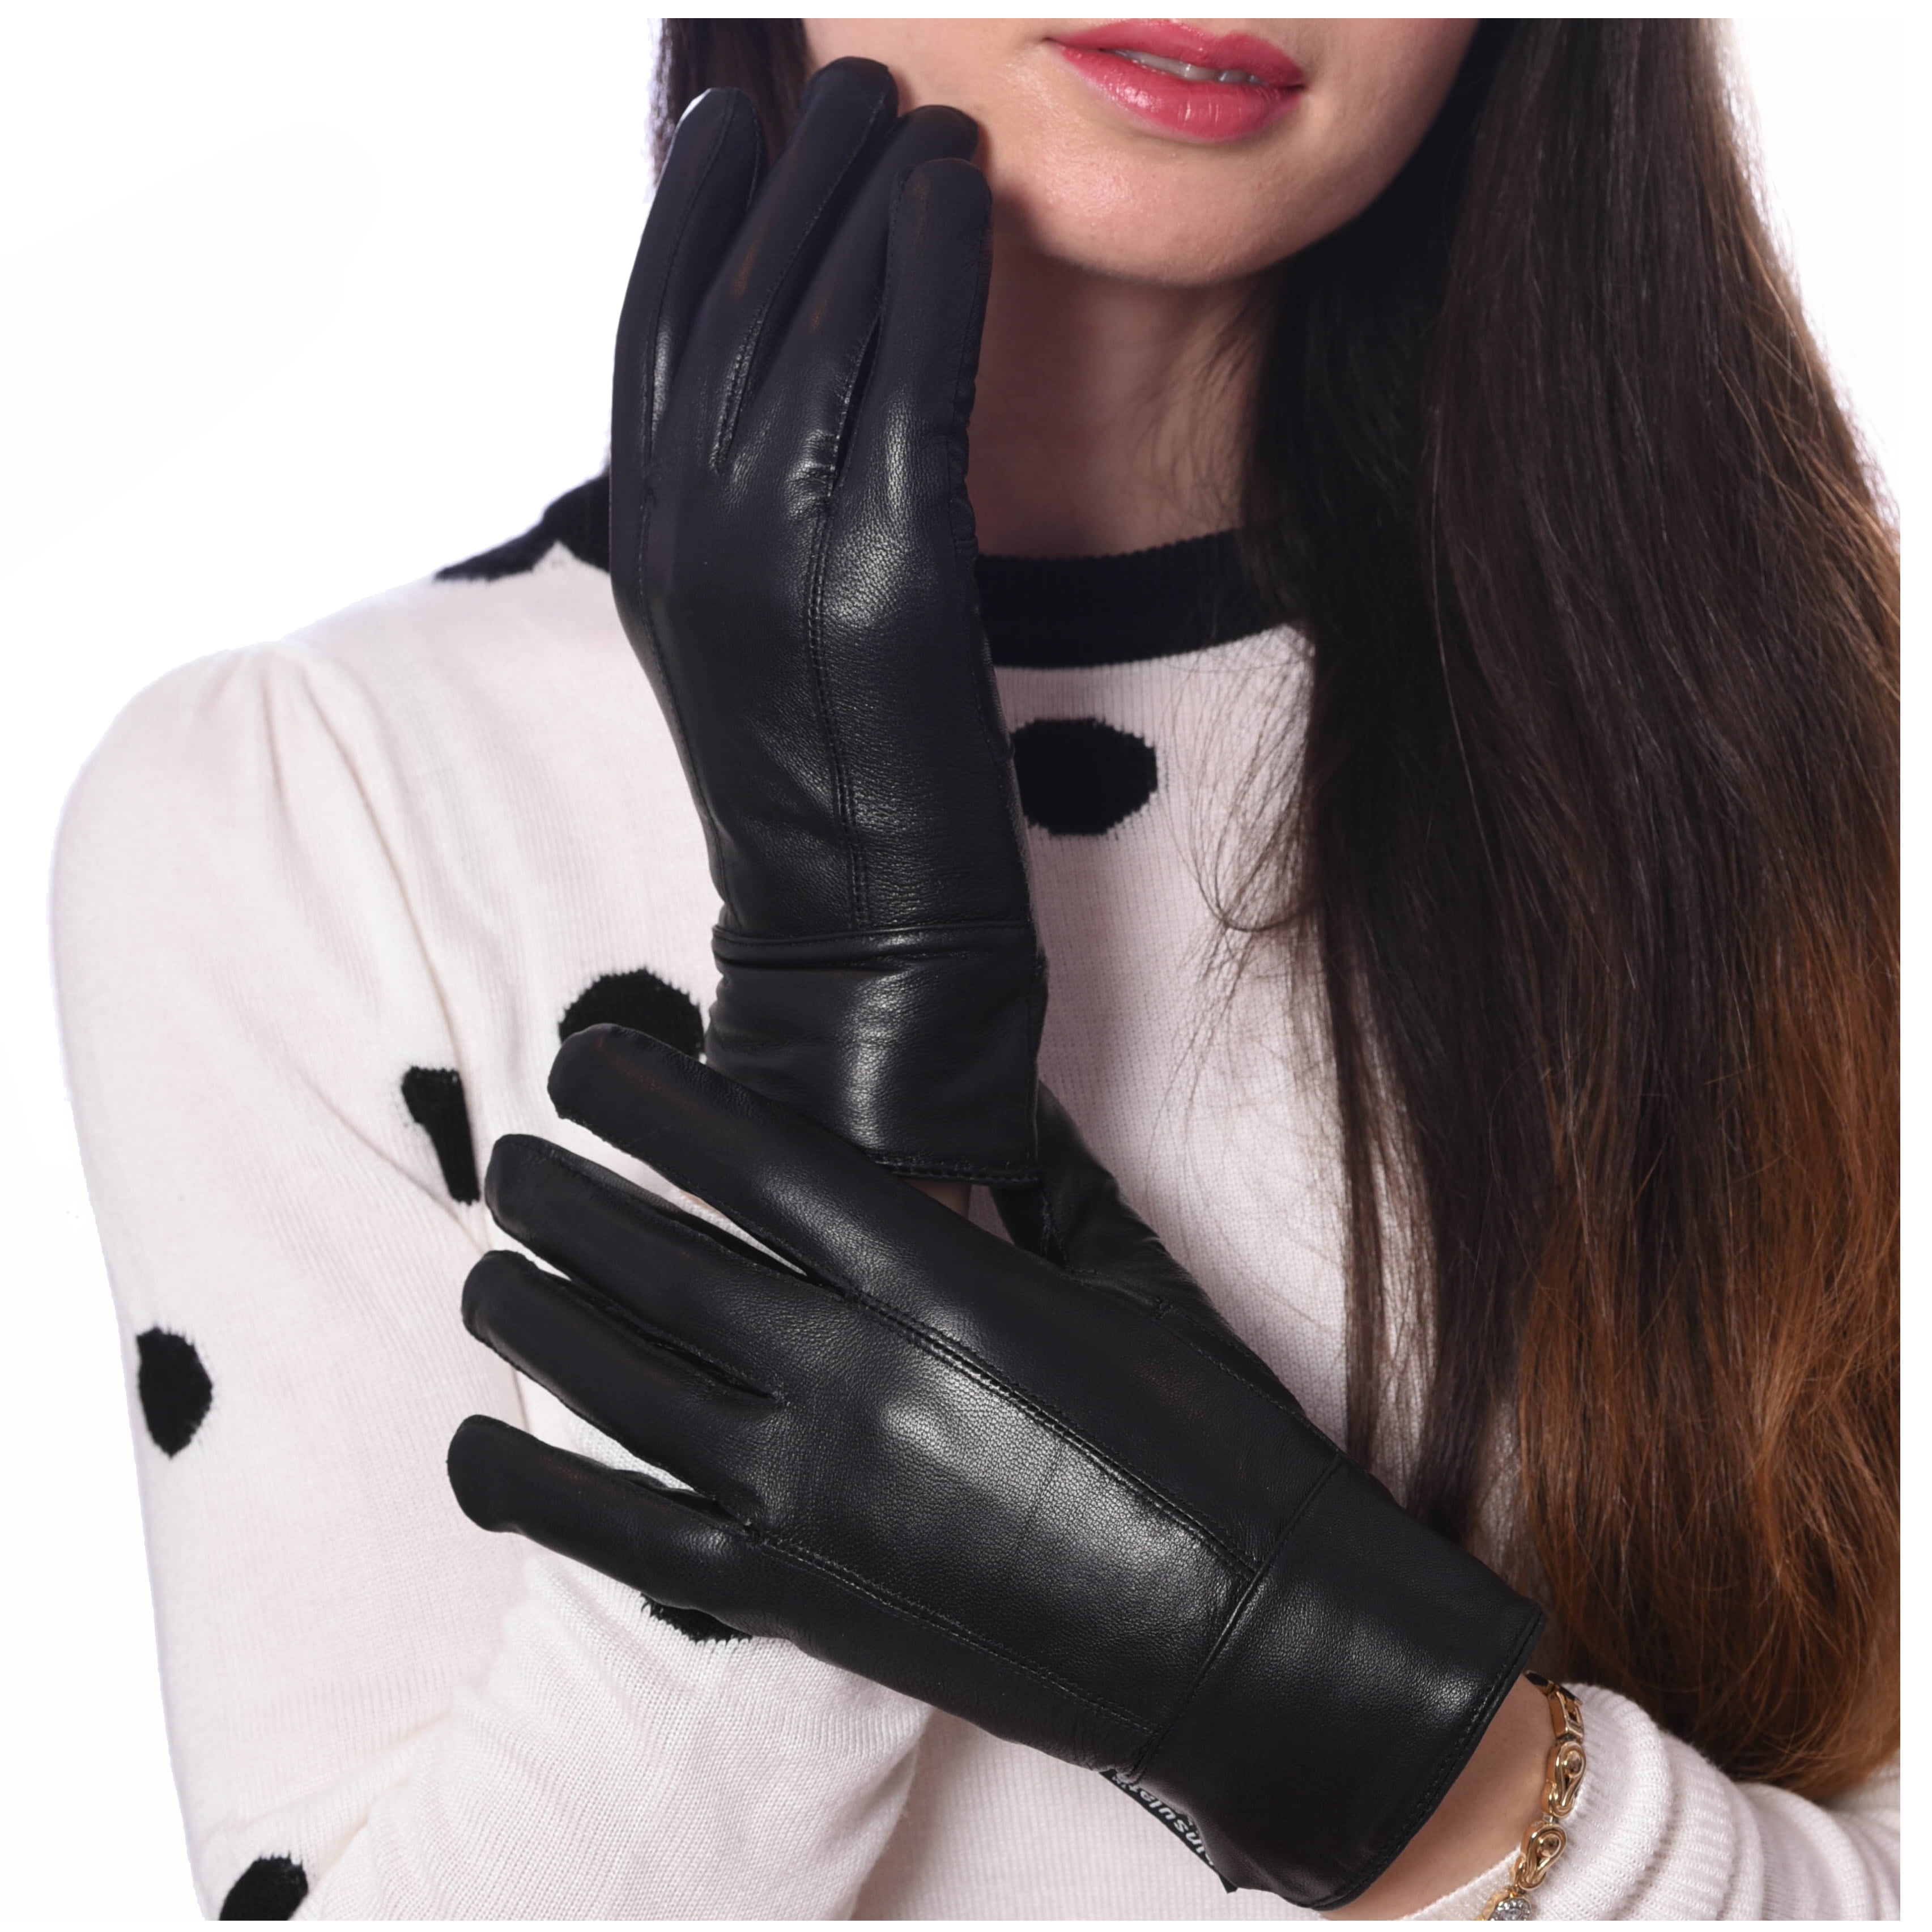 Gift for him Handmade black brown lambskin leather gloves for men with wool lining Really soft warm and elegant.